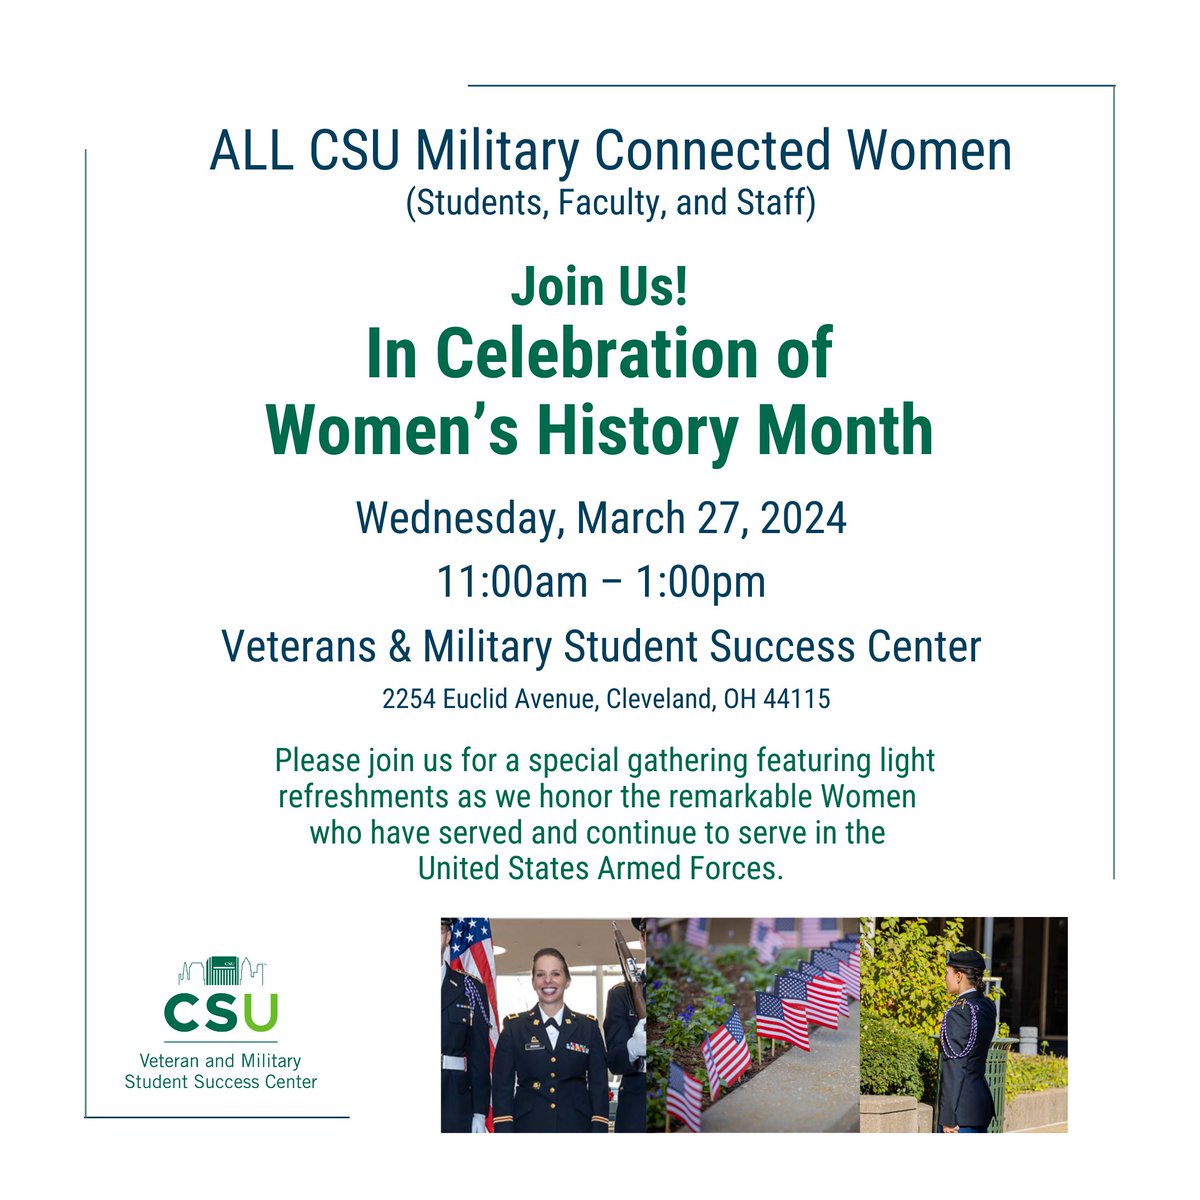 Attention Washkewicz College! Join our friends over at the CSU Veterans Center to celebrate Women's History Month! TOMORROW, March 27, starting at 11 AM. All military connected women are invited. Please join them (and us) in celebrating the achievements of women everywhere!